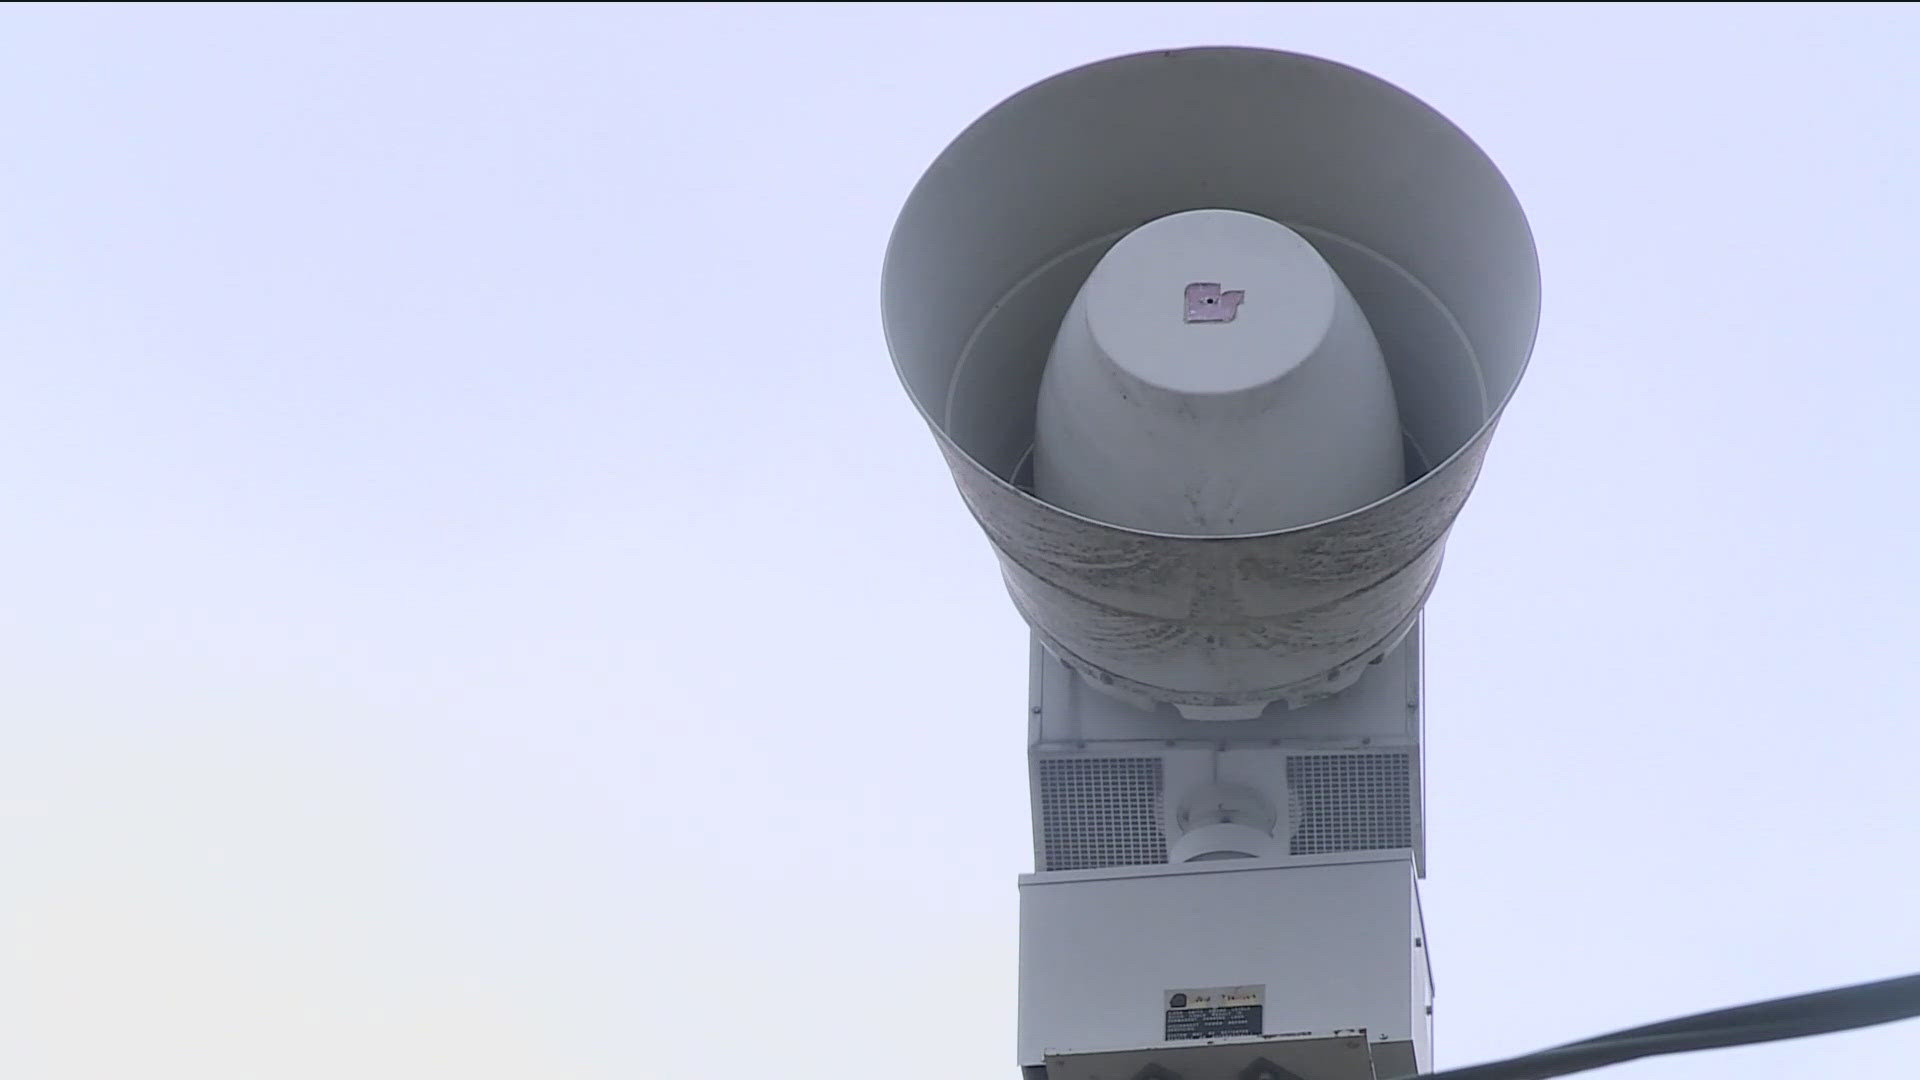 After a weekly test, the Fort Smith Police Department reported that all tornado sirens in the city are working. This comes after five of them had malfunctions.